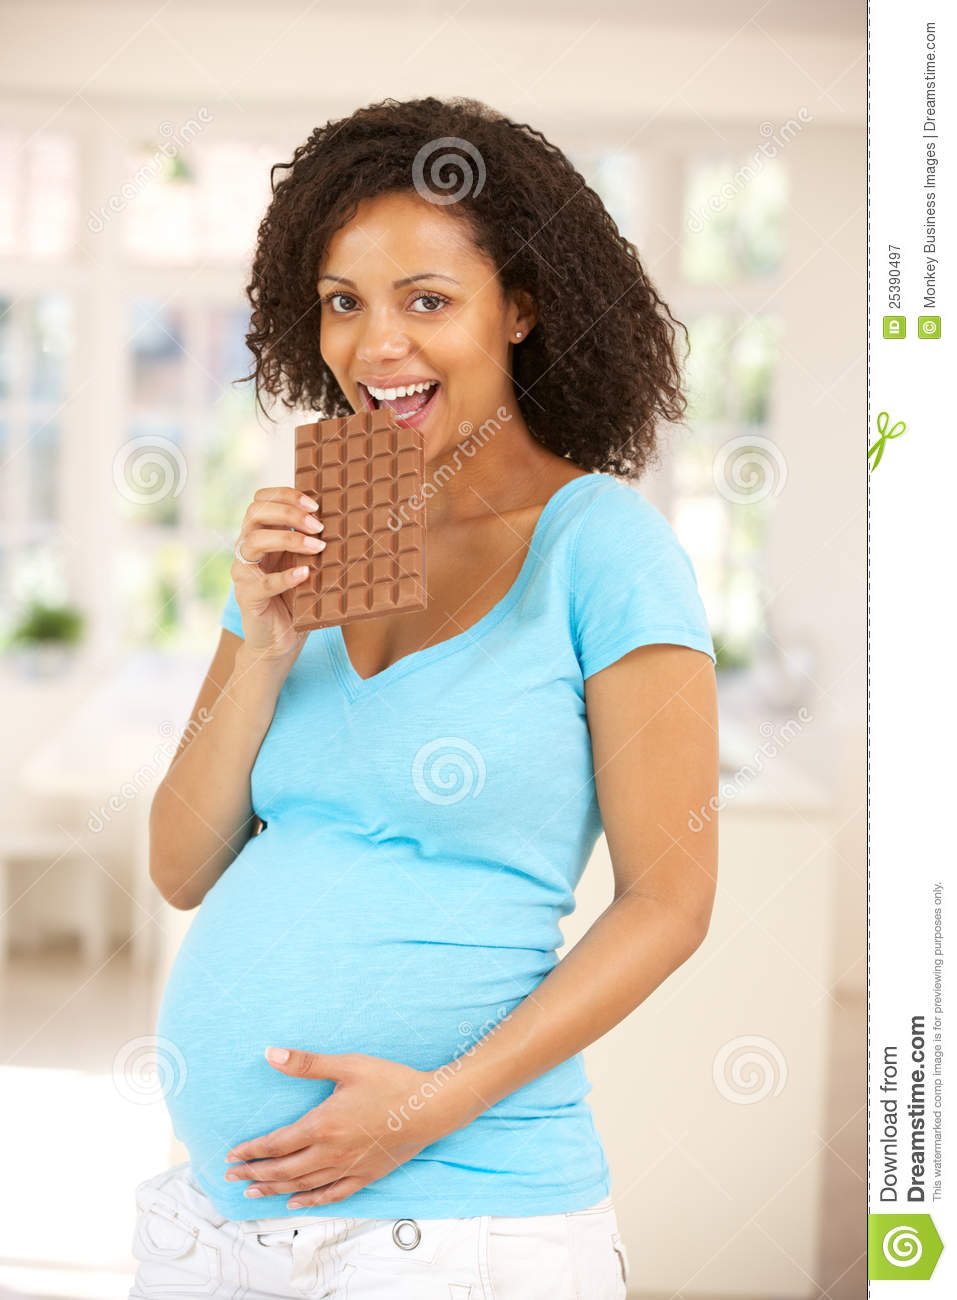 Pregnant Woman Eating Chocolate Royalty Free Stock Photography   Image